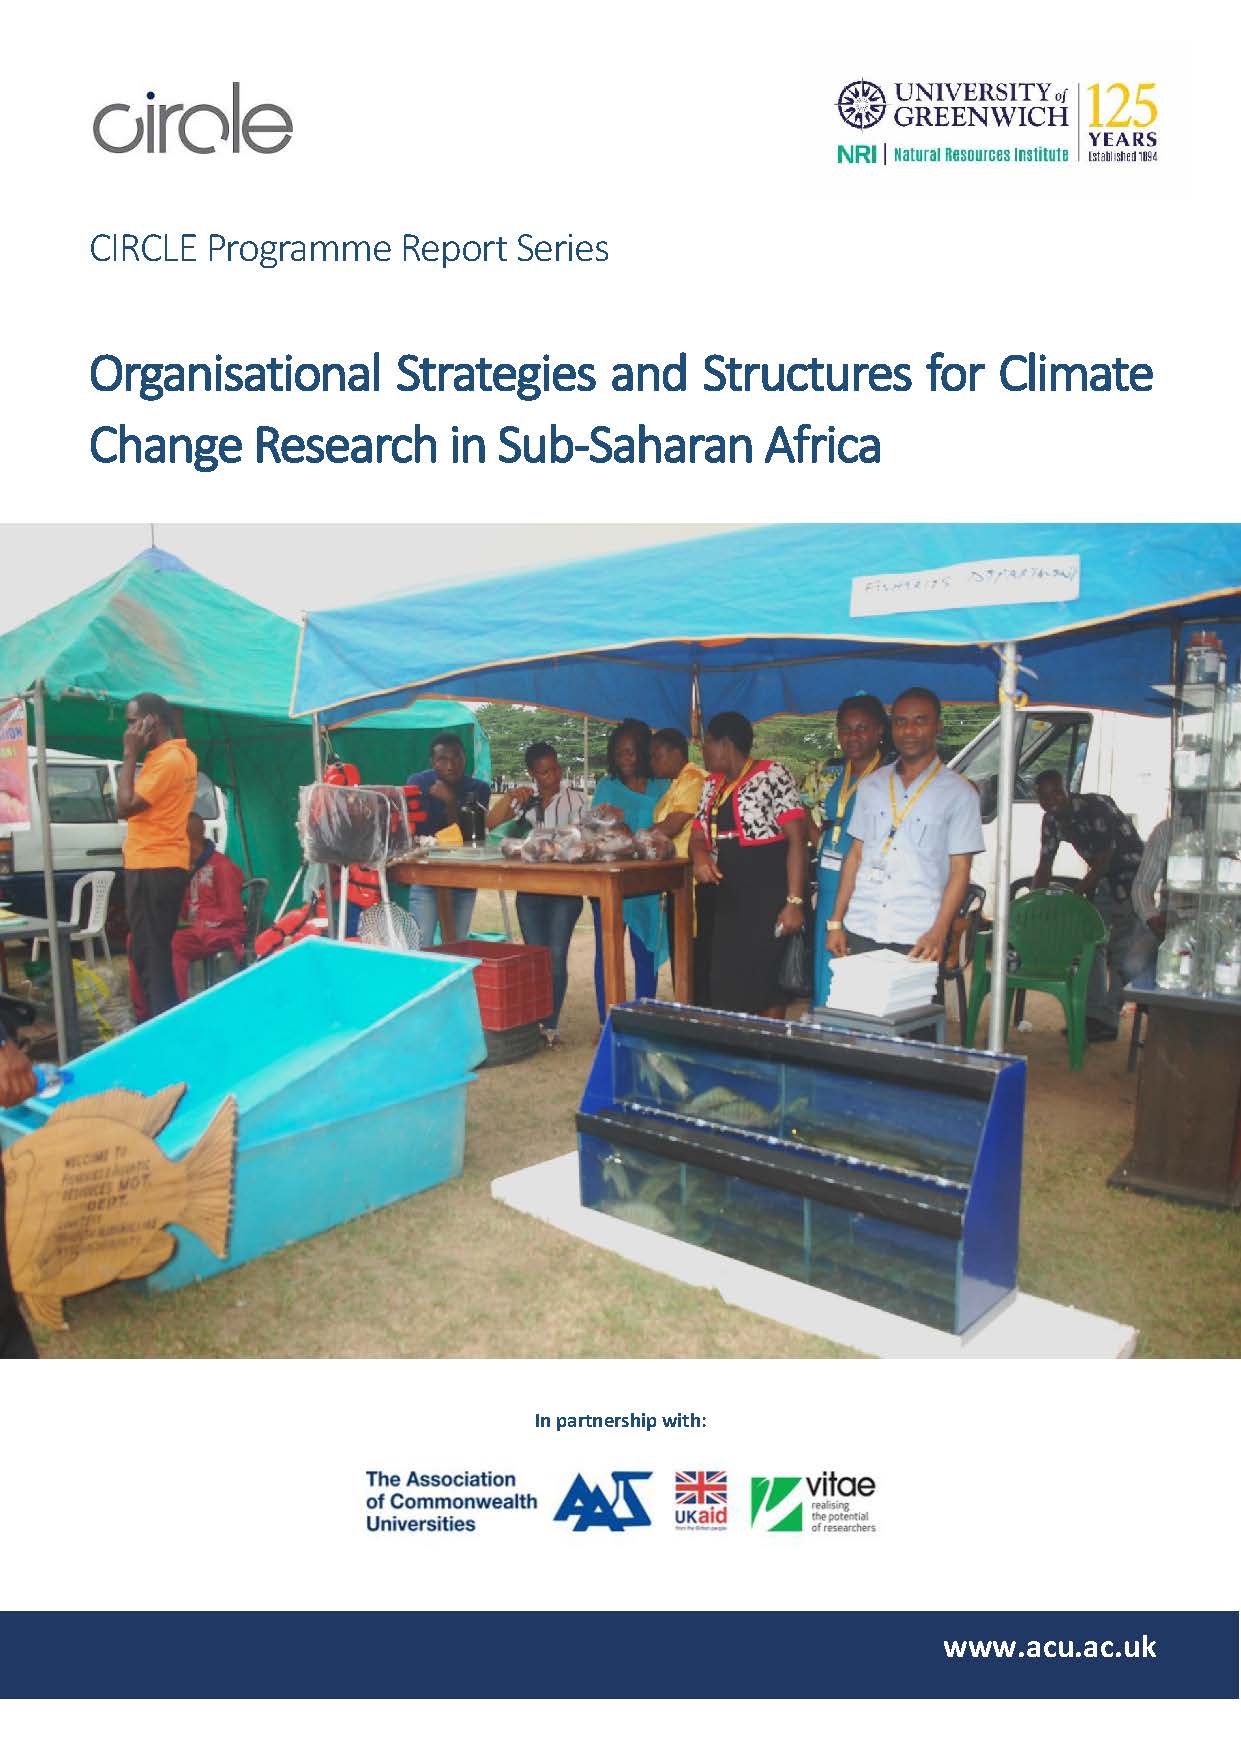 Organisational Strategies and Structures for Climate Change Research in Sub-Saharan Africa